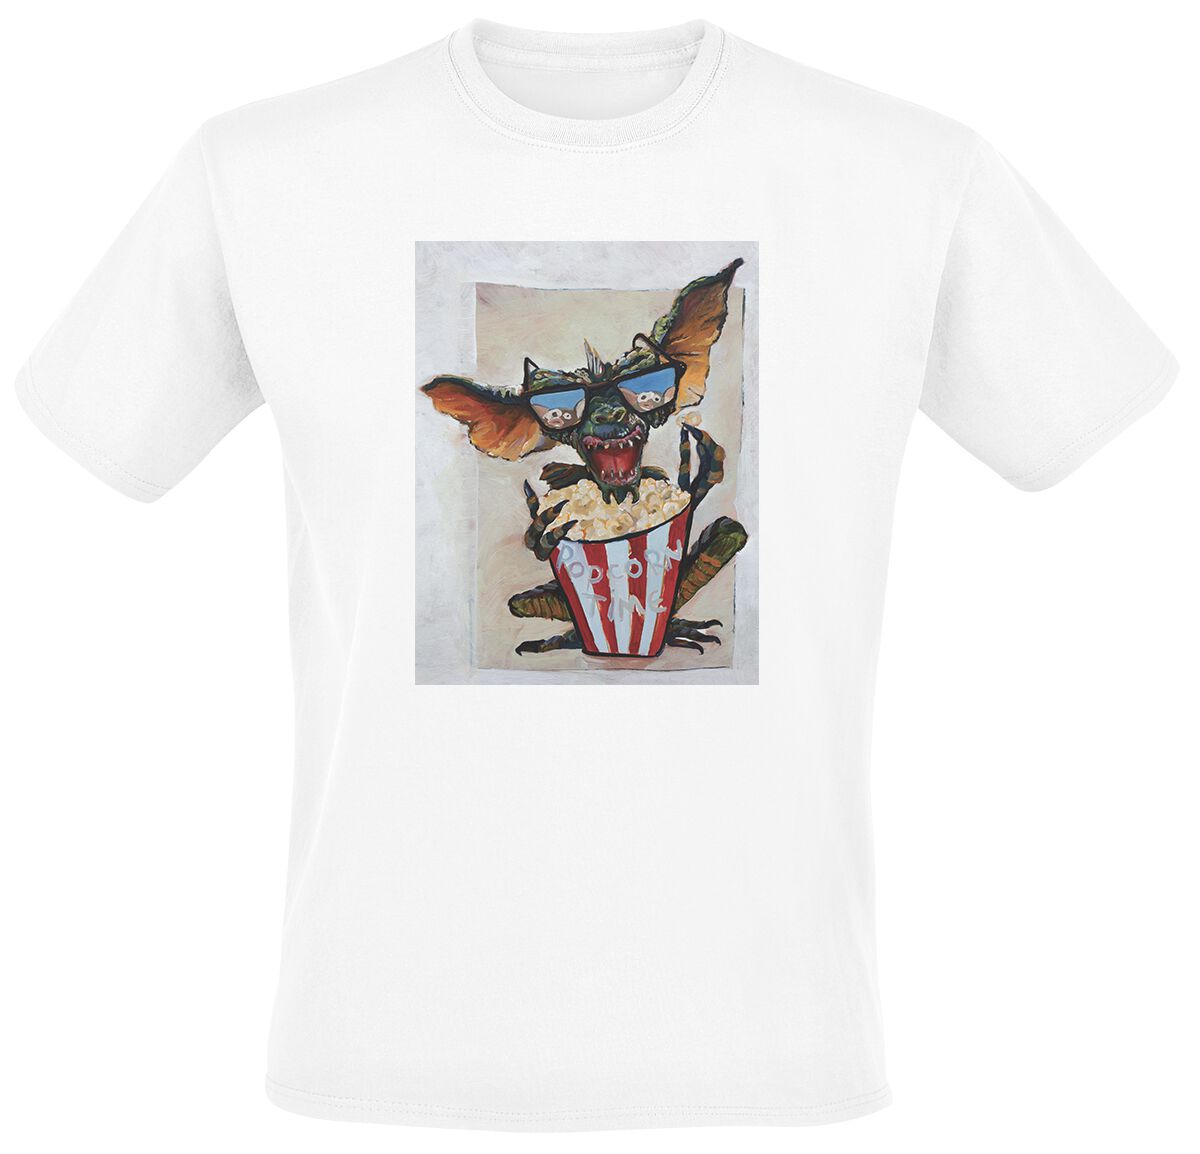 Gremlins Gremlin with popcorn T-Shirt white product